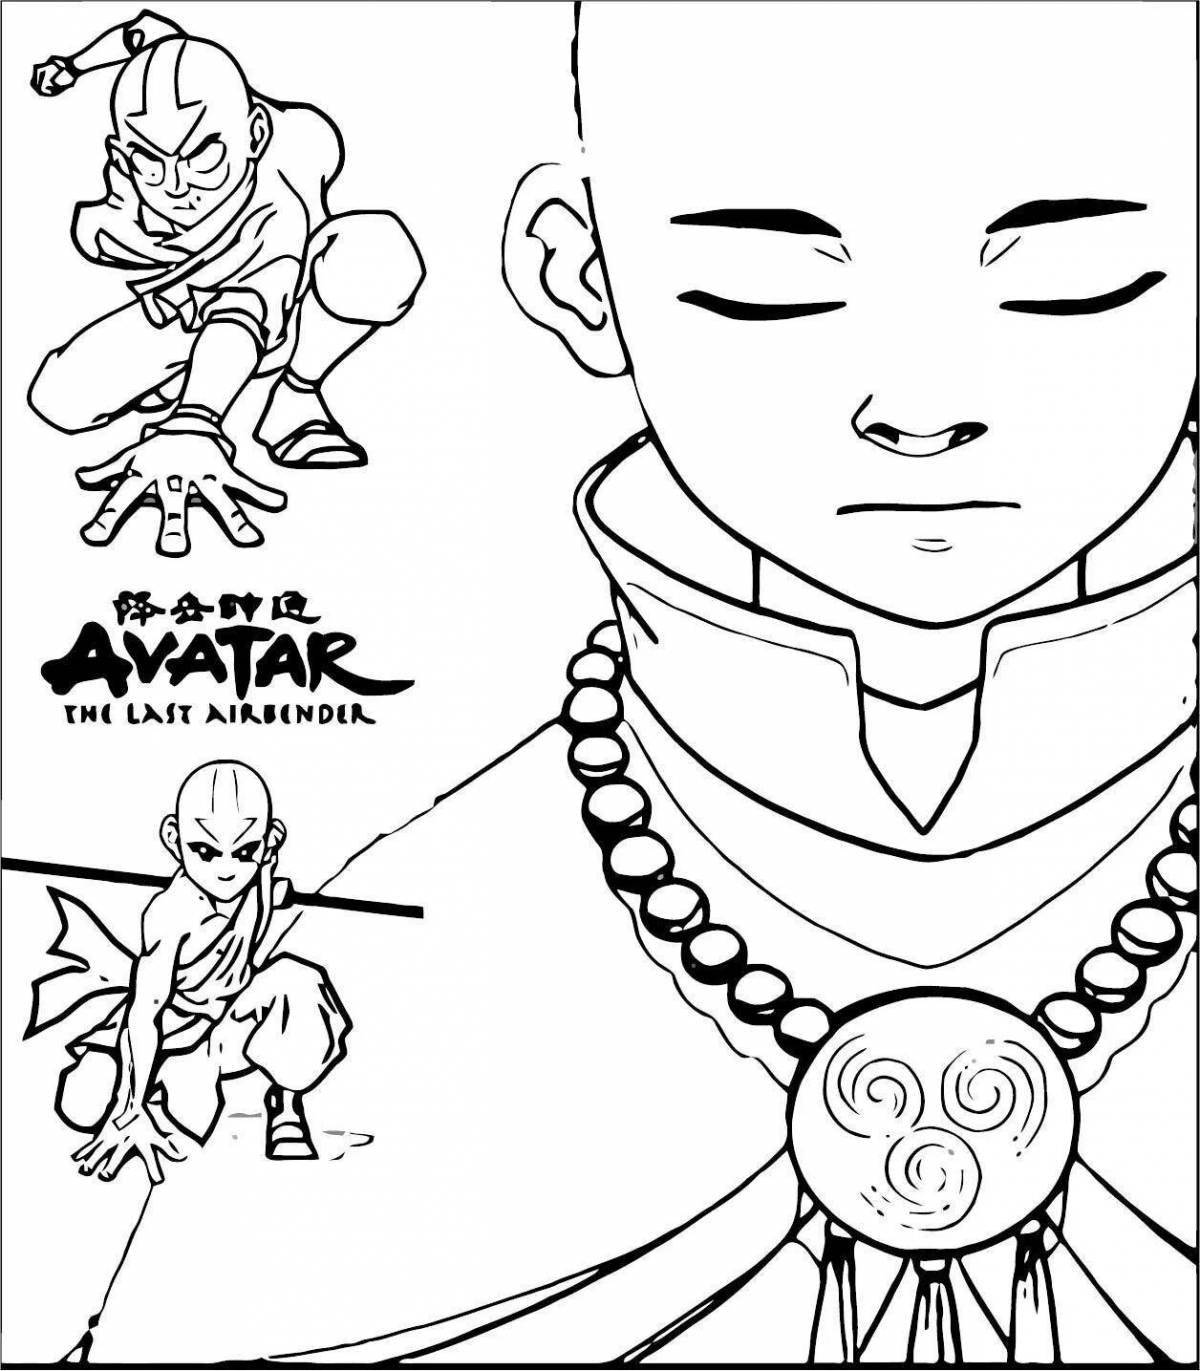 Aang's exciting coloring book